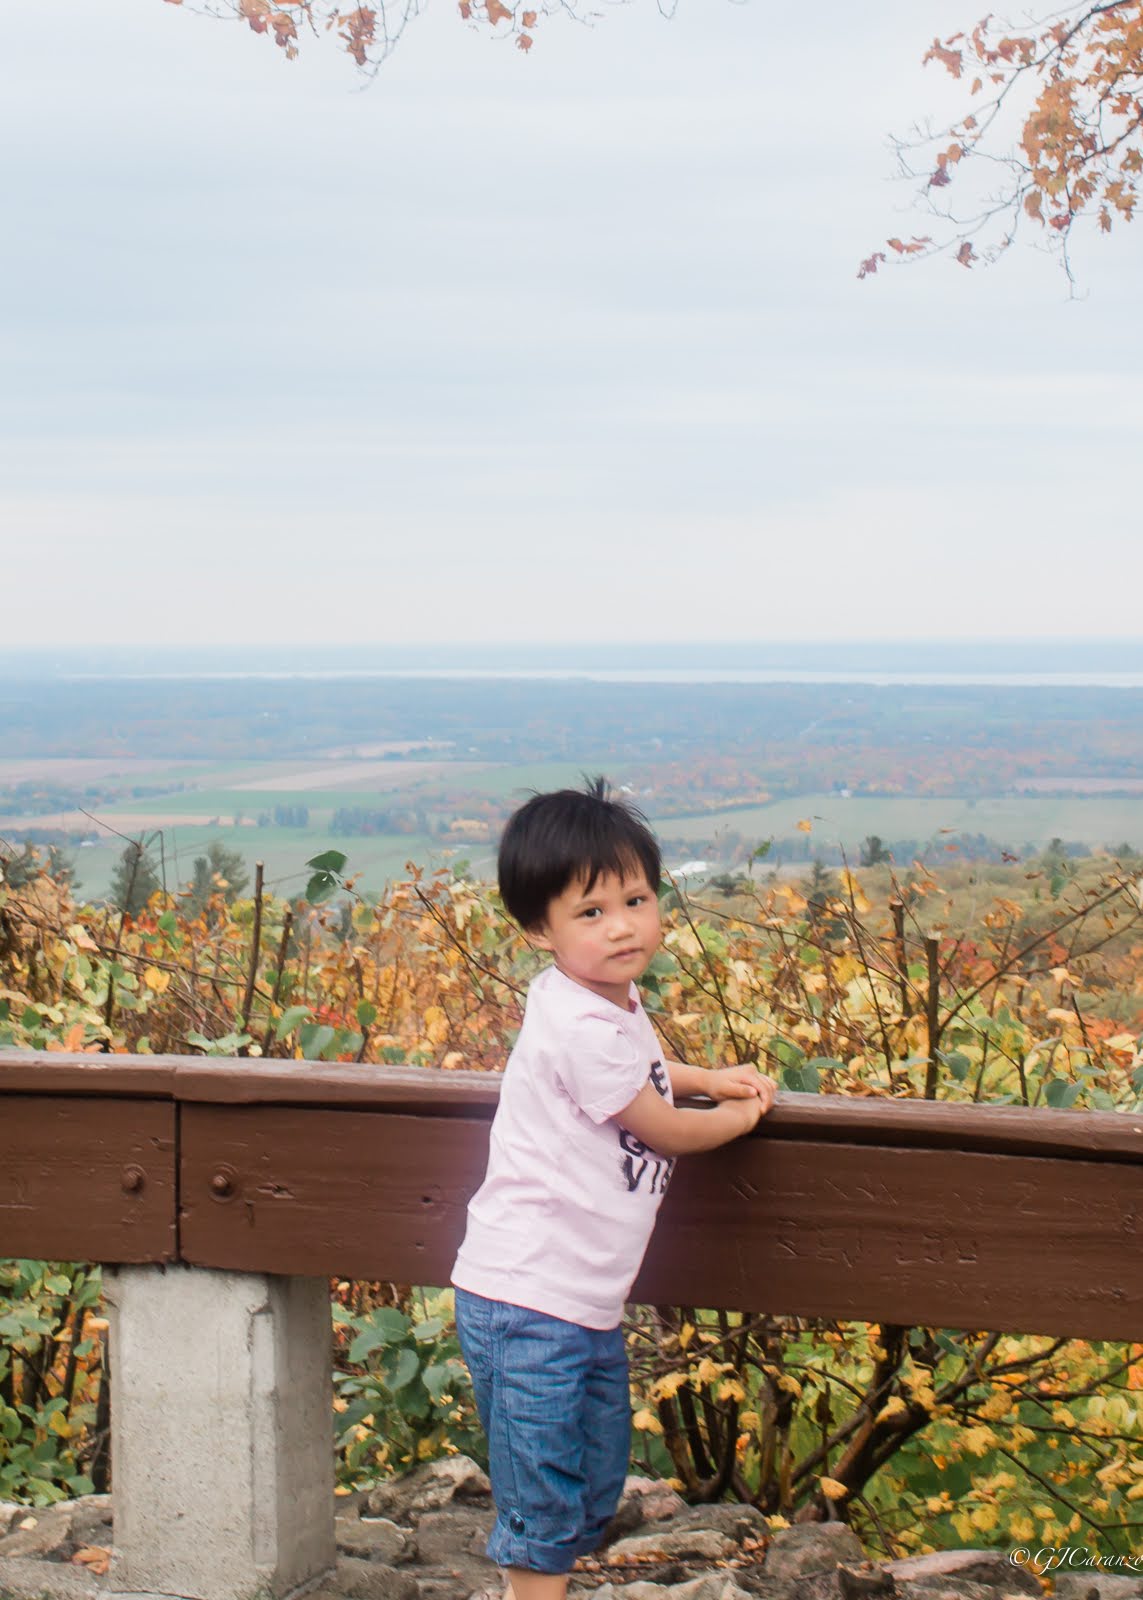 Travel Blog: See the Fall Foliage at Gatineau Park, Quebec